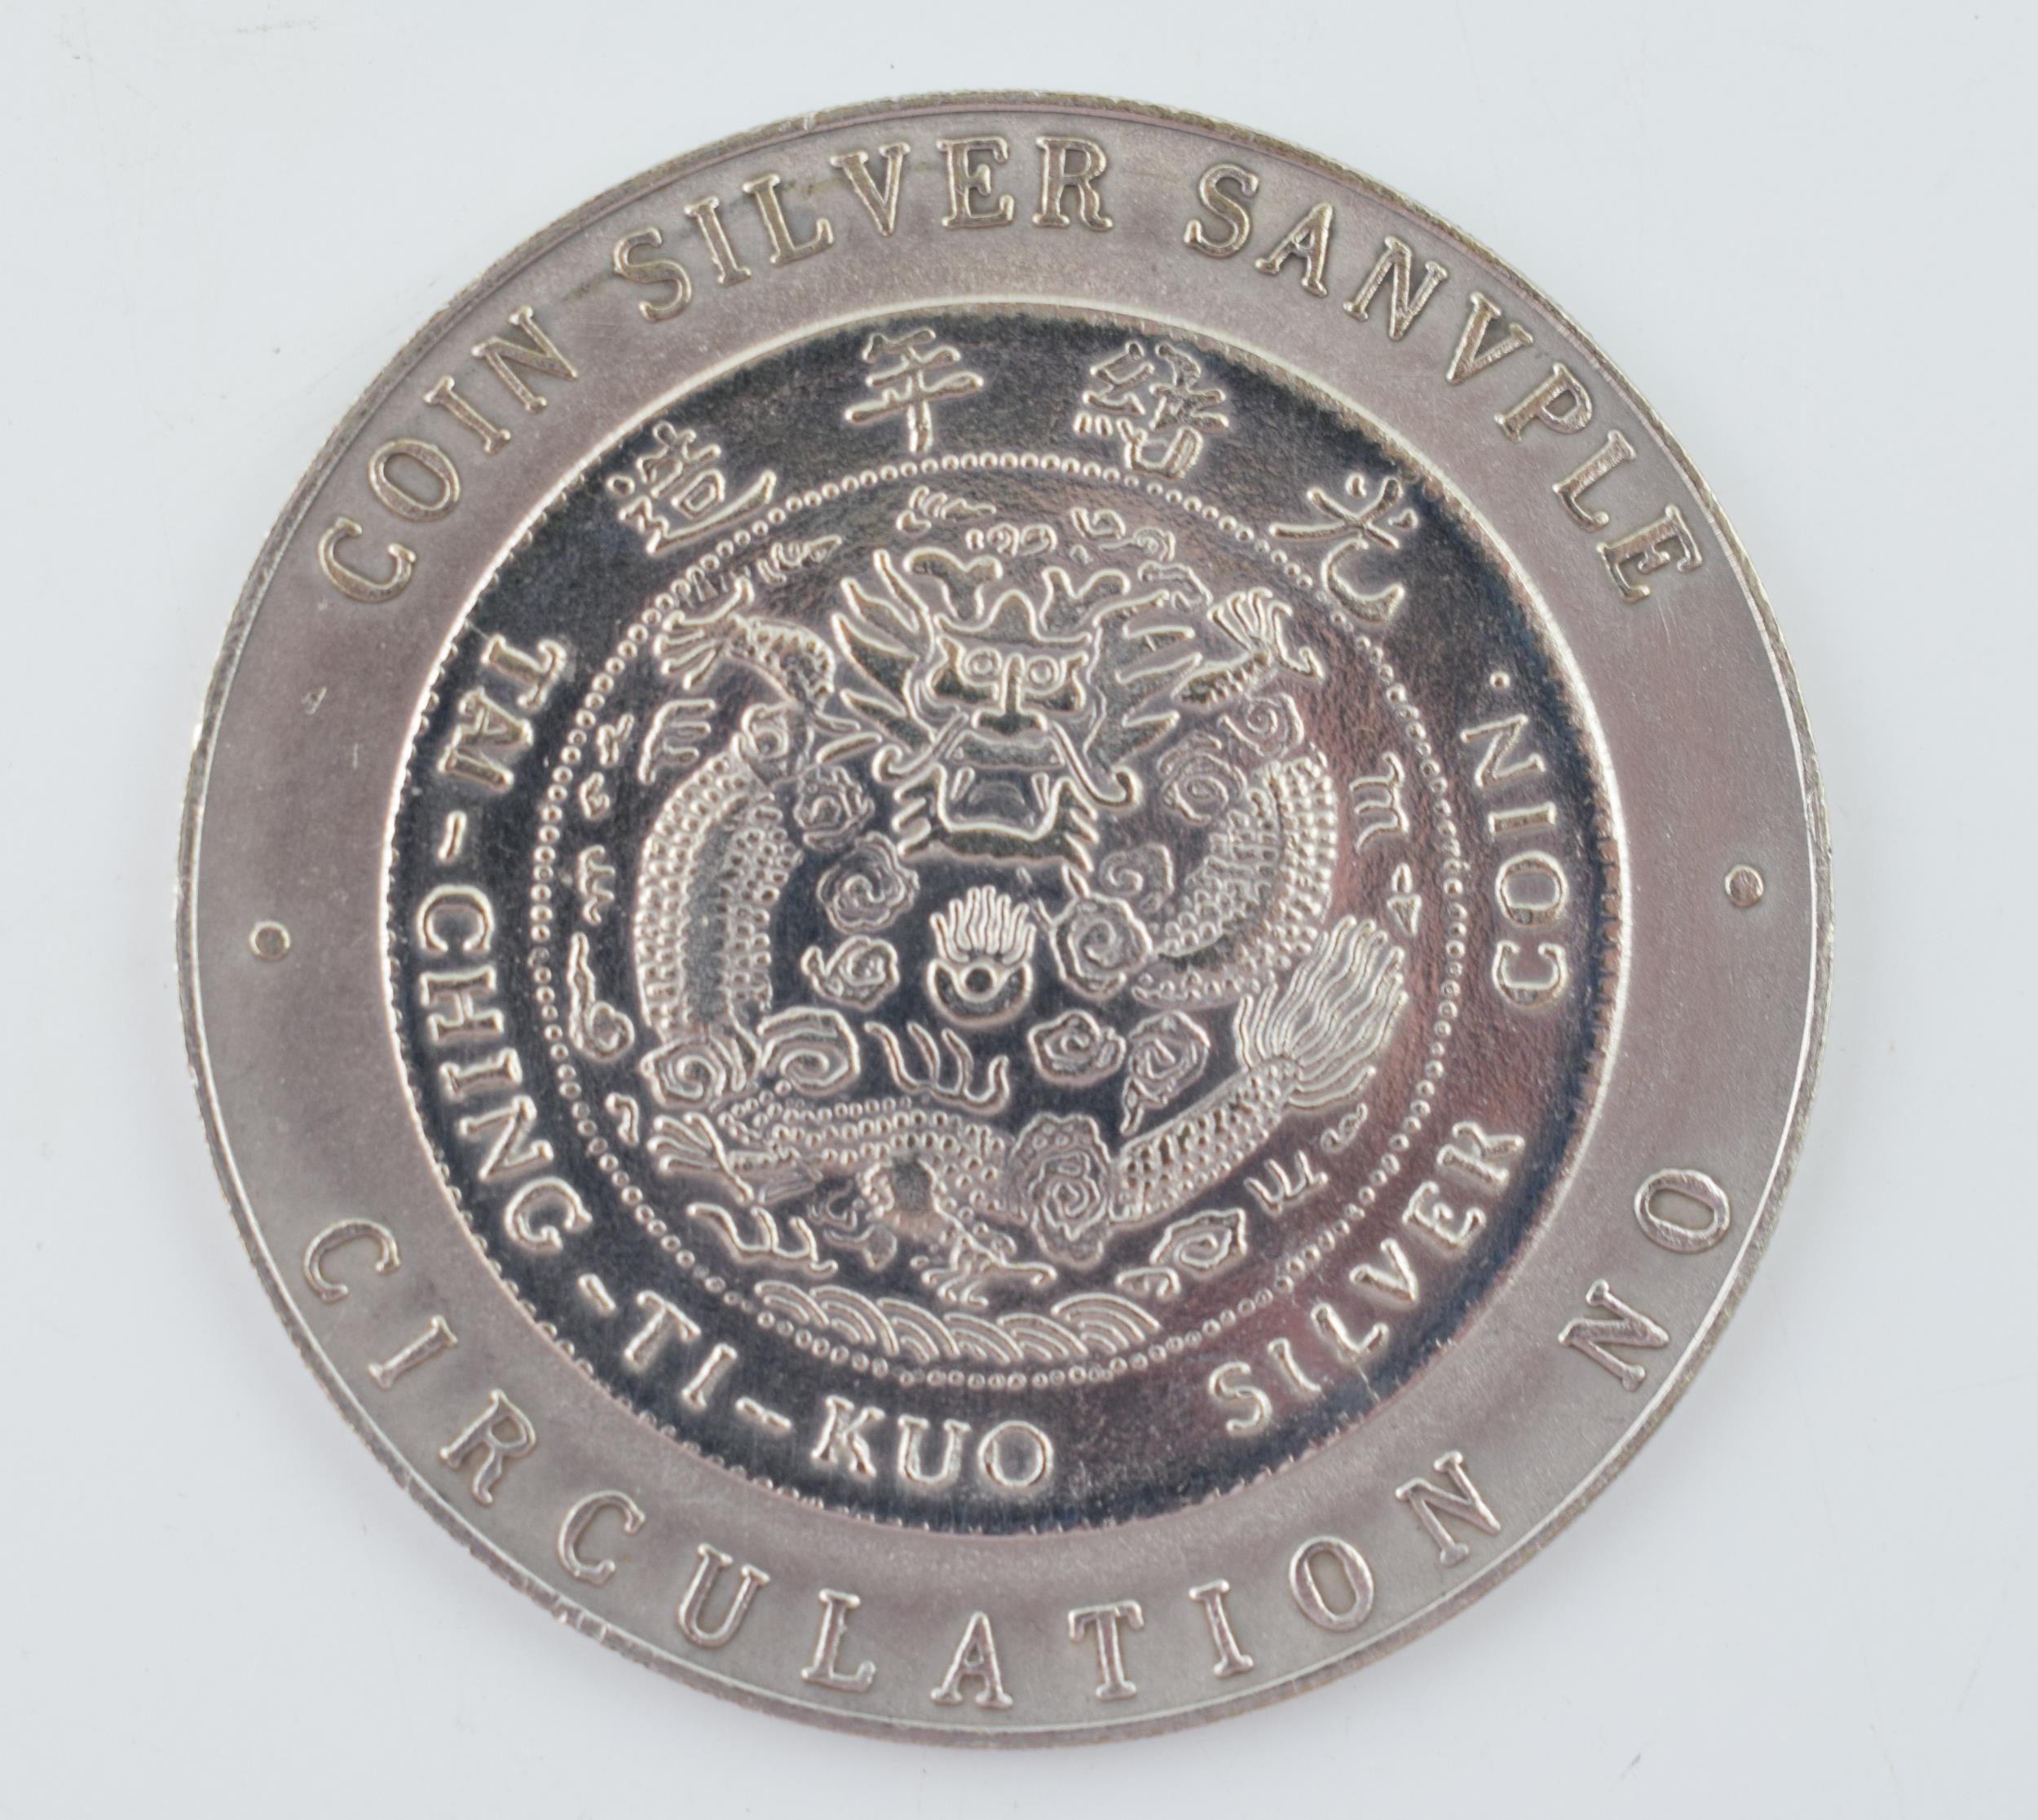 A Tai-Ching-Ti-Kuo Silver Coin. Diameter 50mm. Height 29.3 grams. With some signs of light wear.